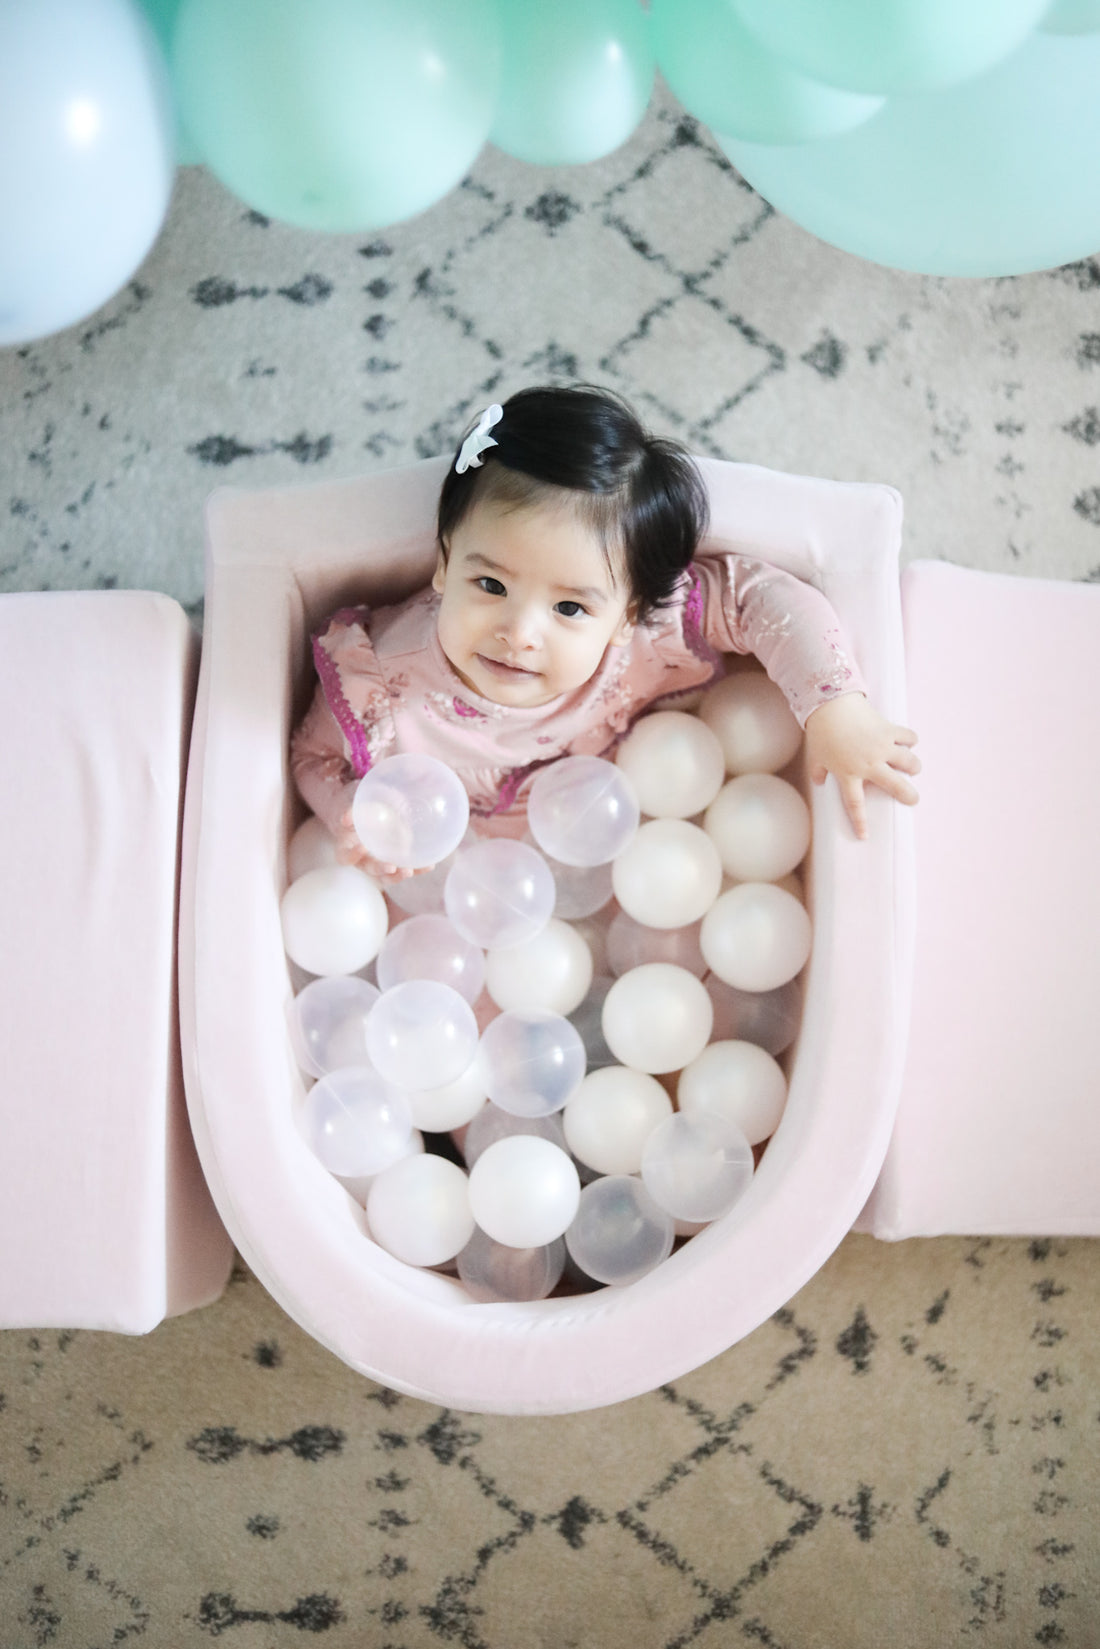 little girl sitting in meowbaby luxury ball pit and looking up